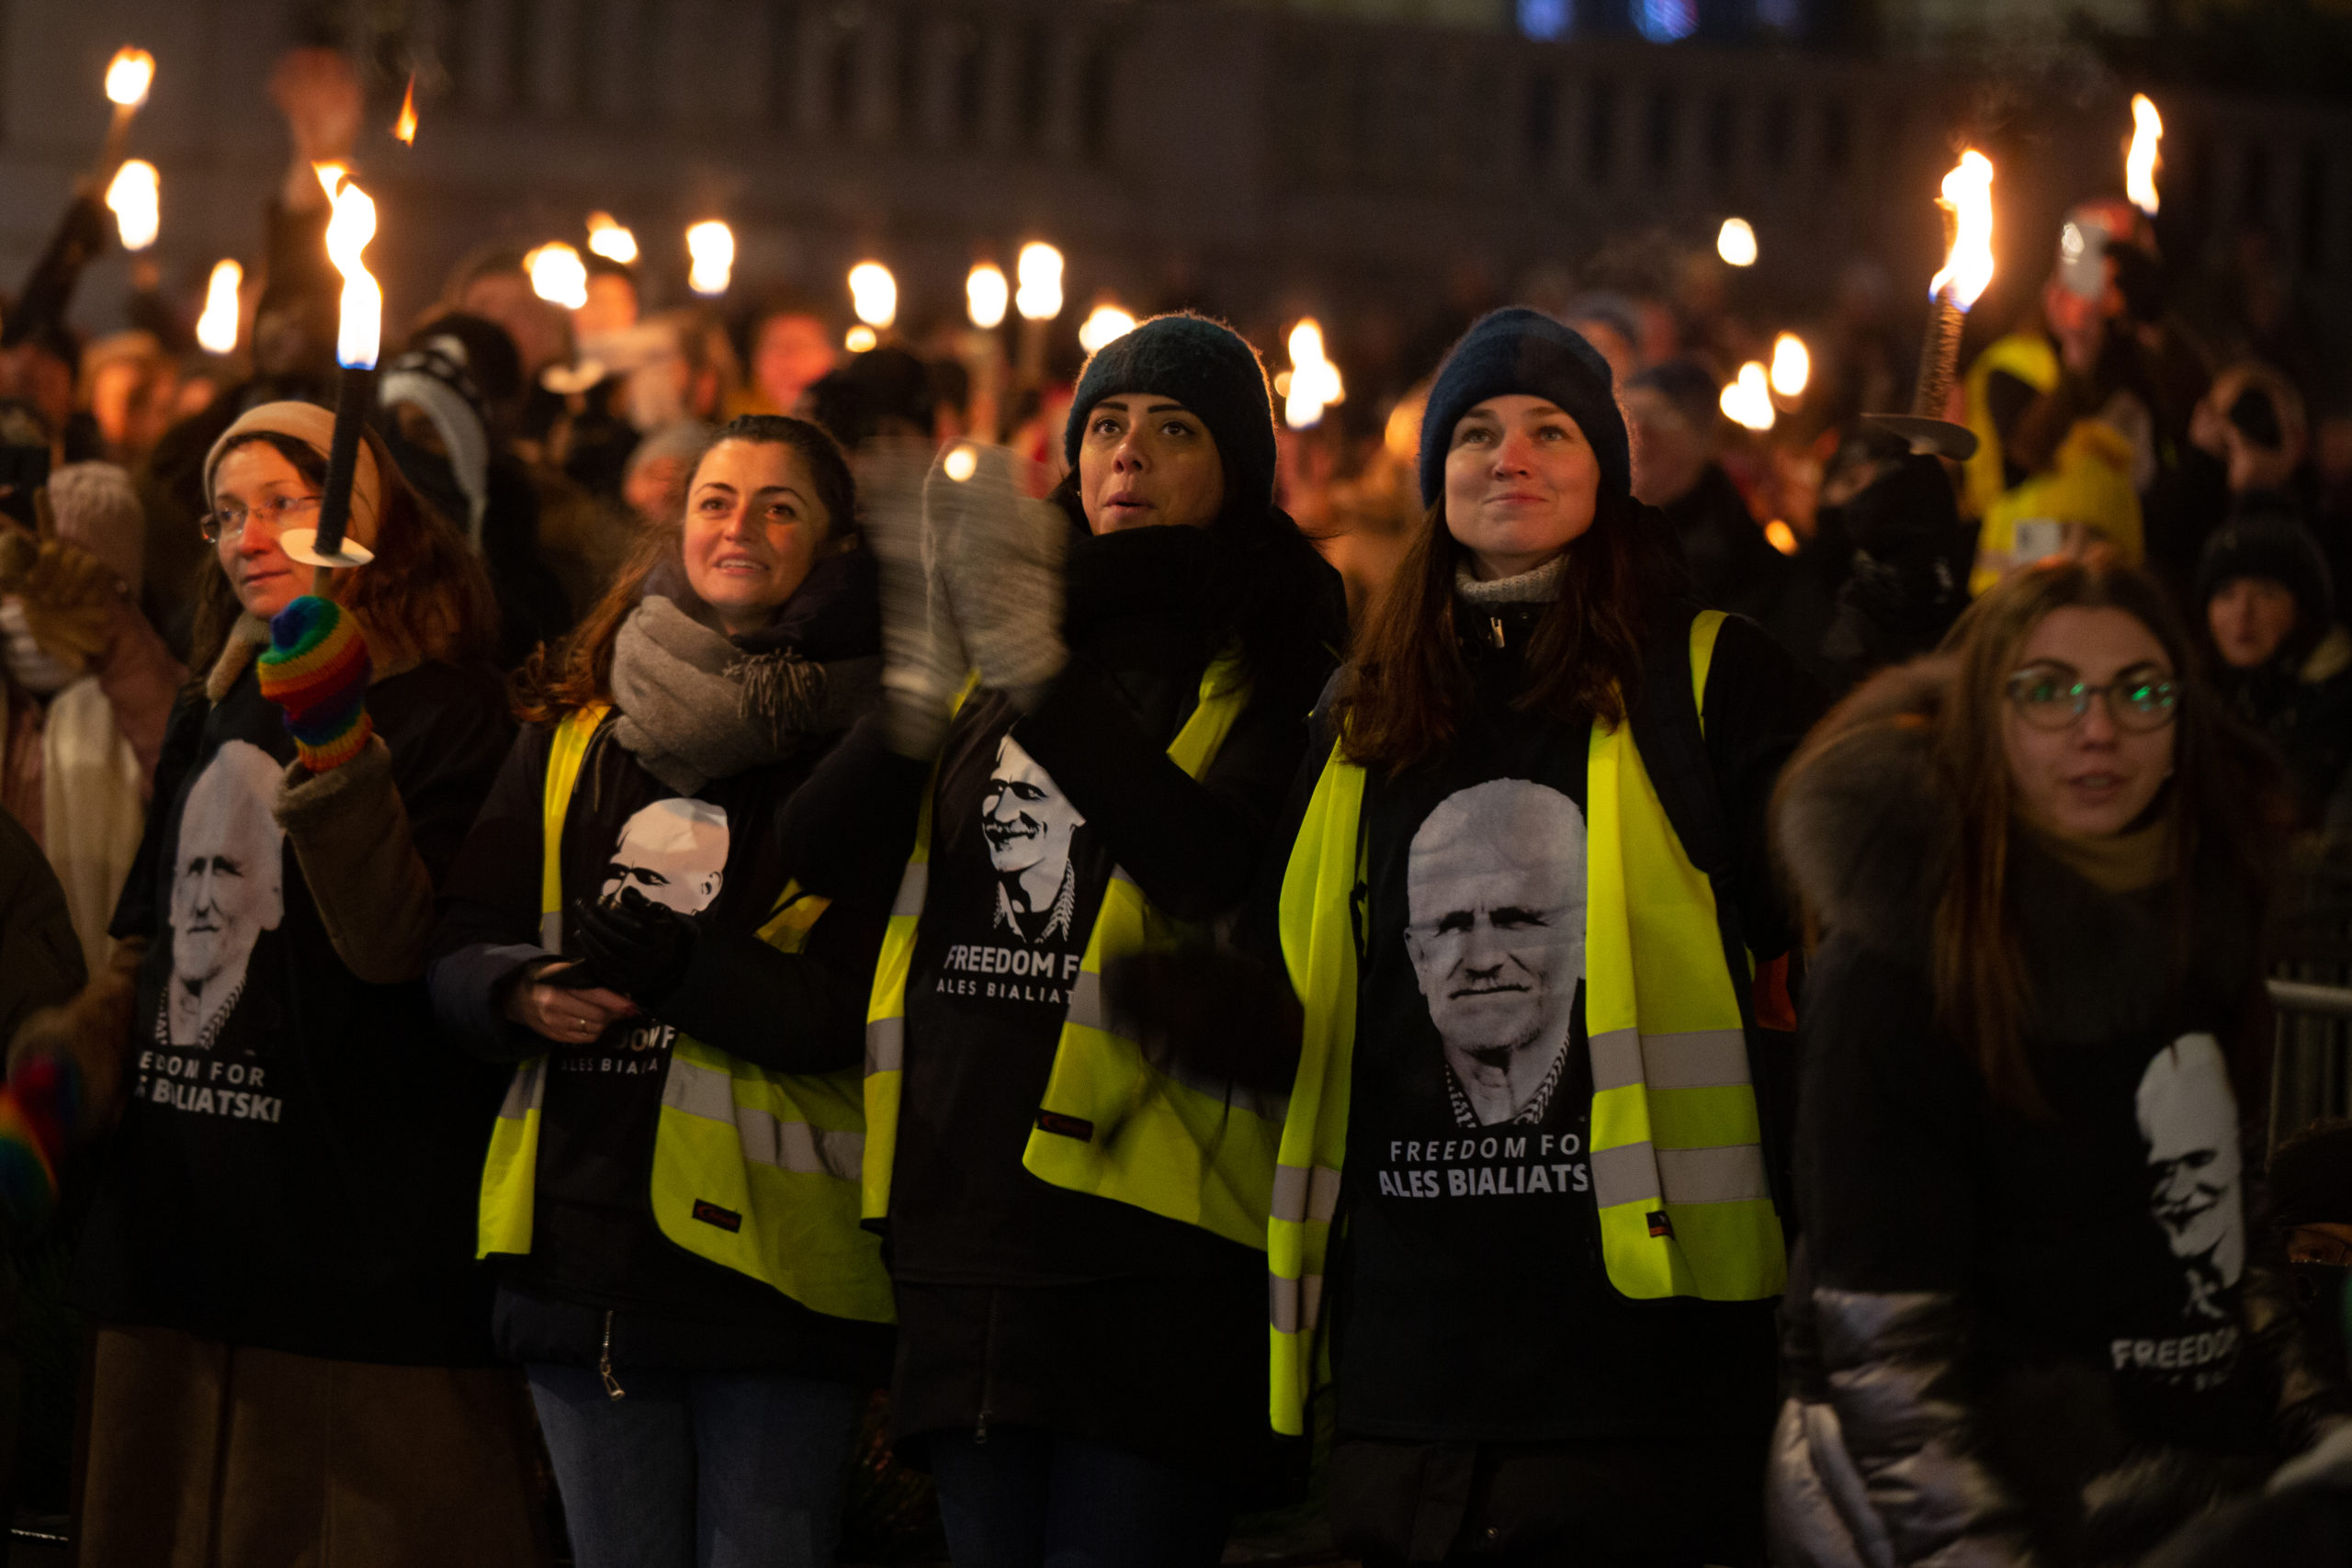 10 December 2022: Following the Nobel Peace Prize award ceremony, people marched through the streets of Olso in a peaceful torchlight procession in support, solidarity and celebration of the incredible human rights work of the laureates.